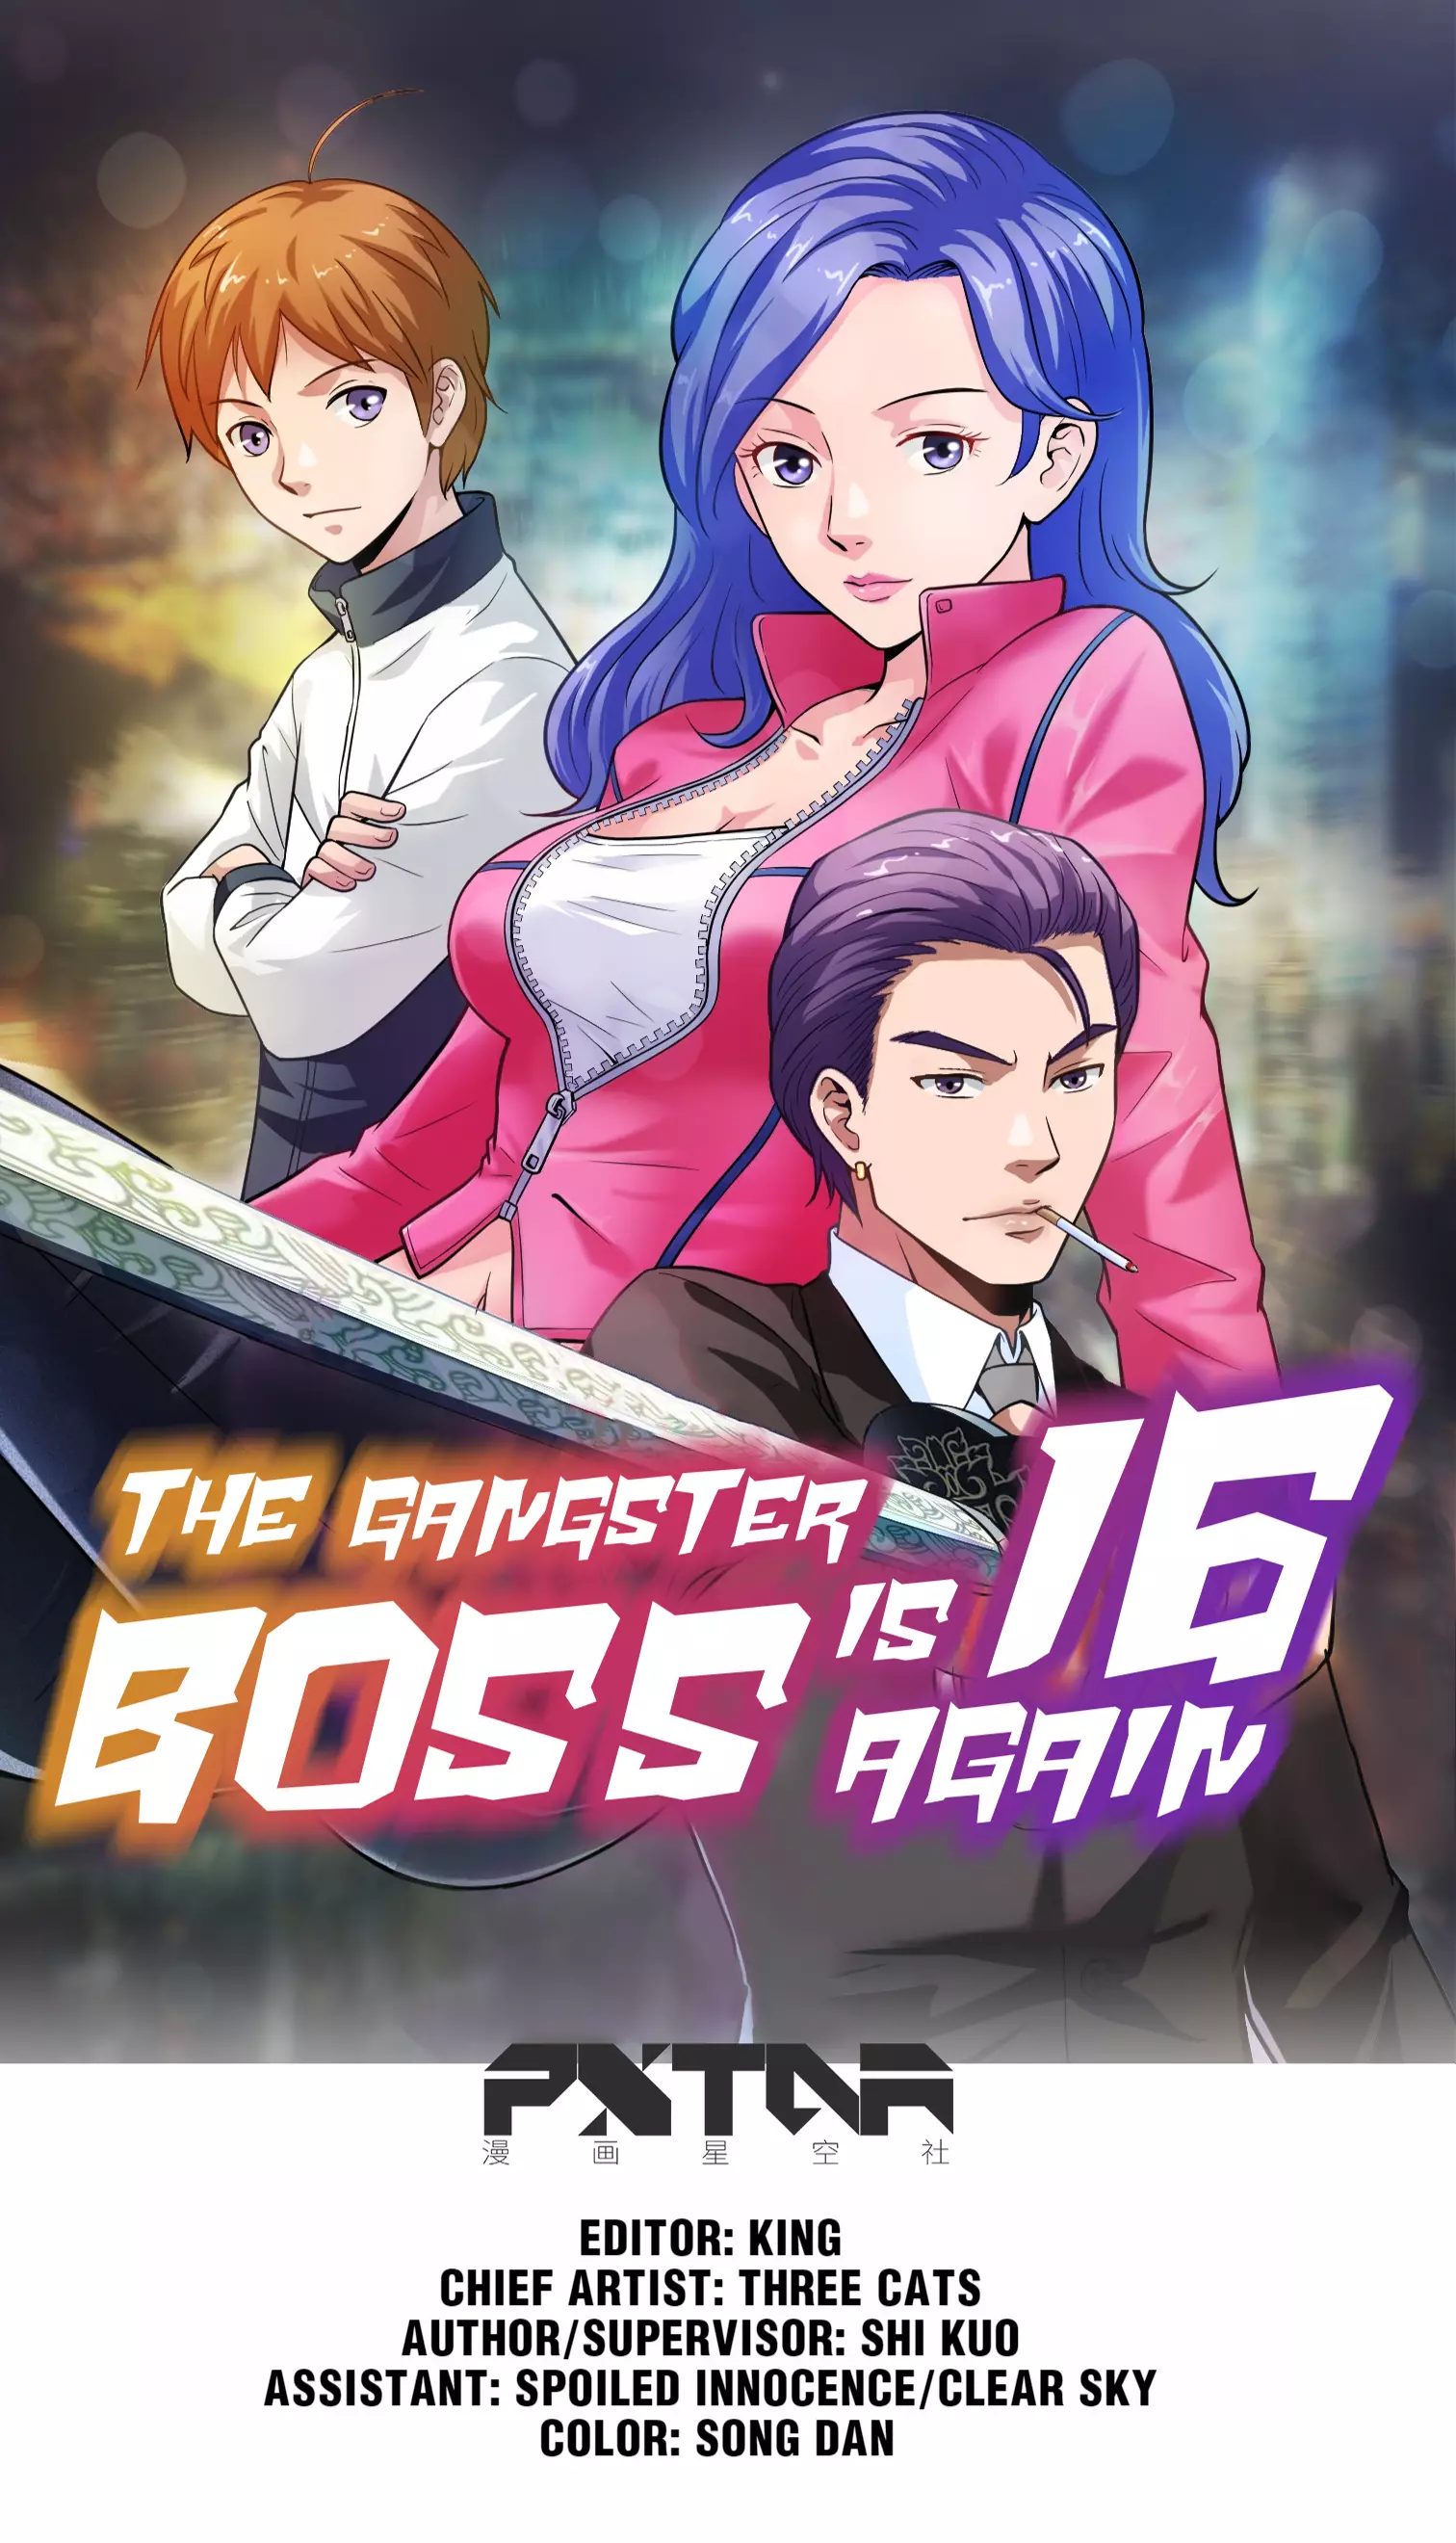 The Gangster Boss Is 16 Again - 9 page 1-cf0317ac